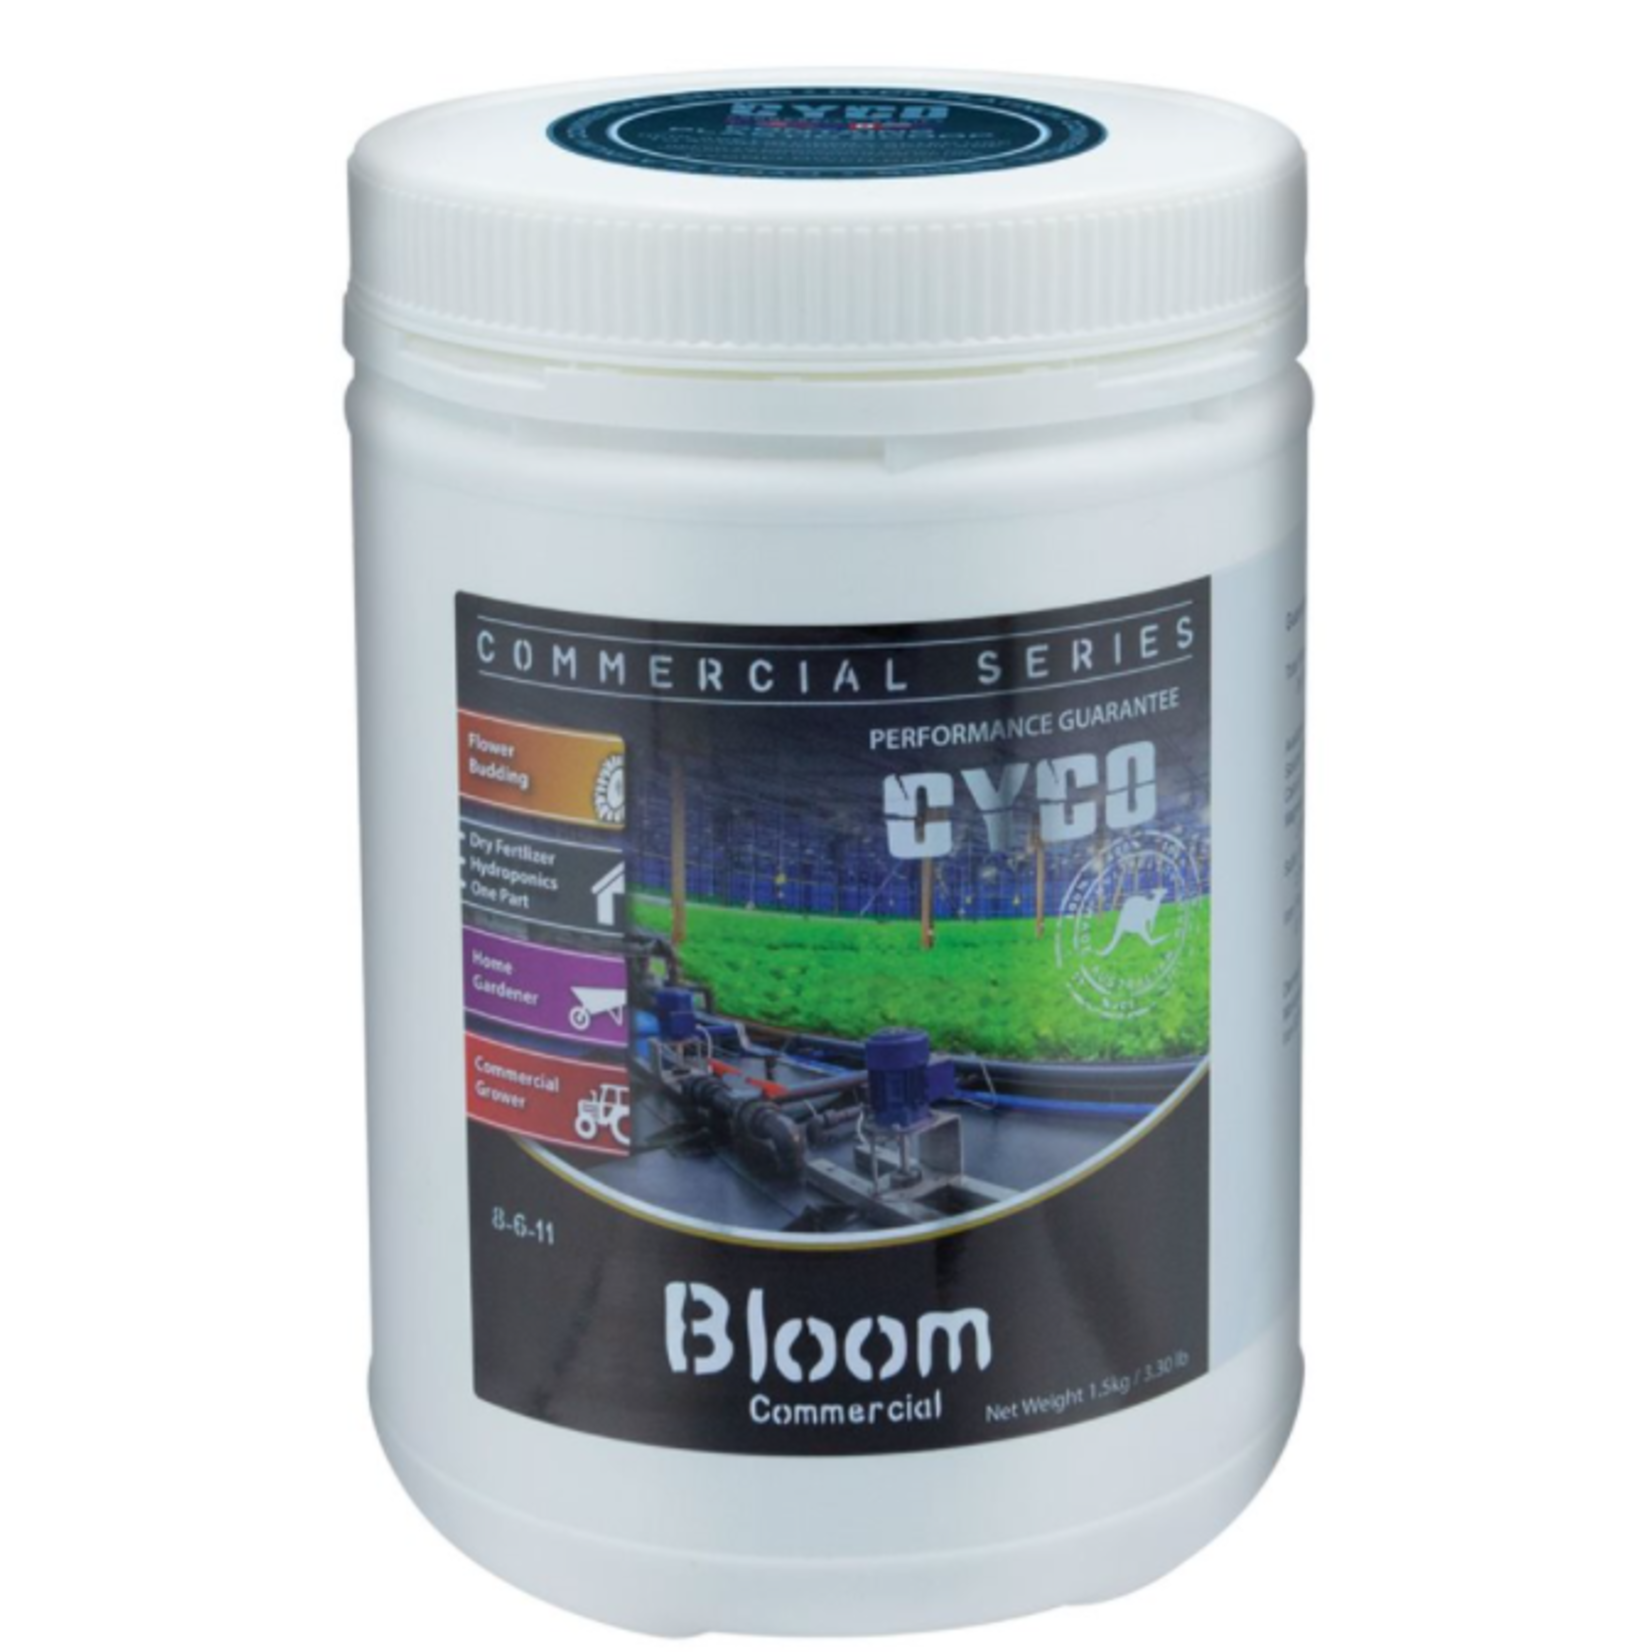 CYCO Commercial Series Bloom 1.5 Kg